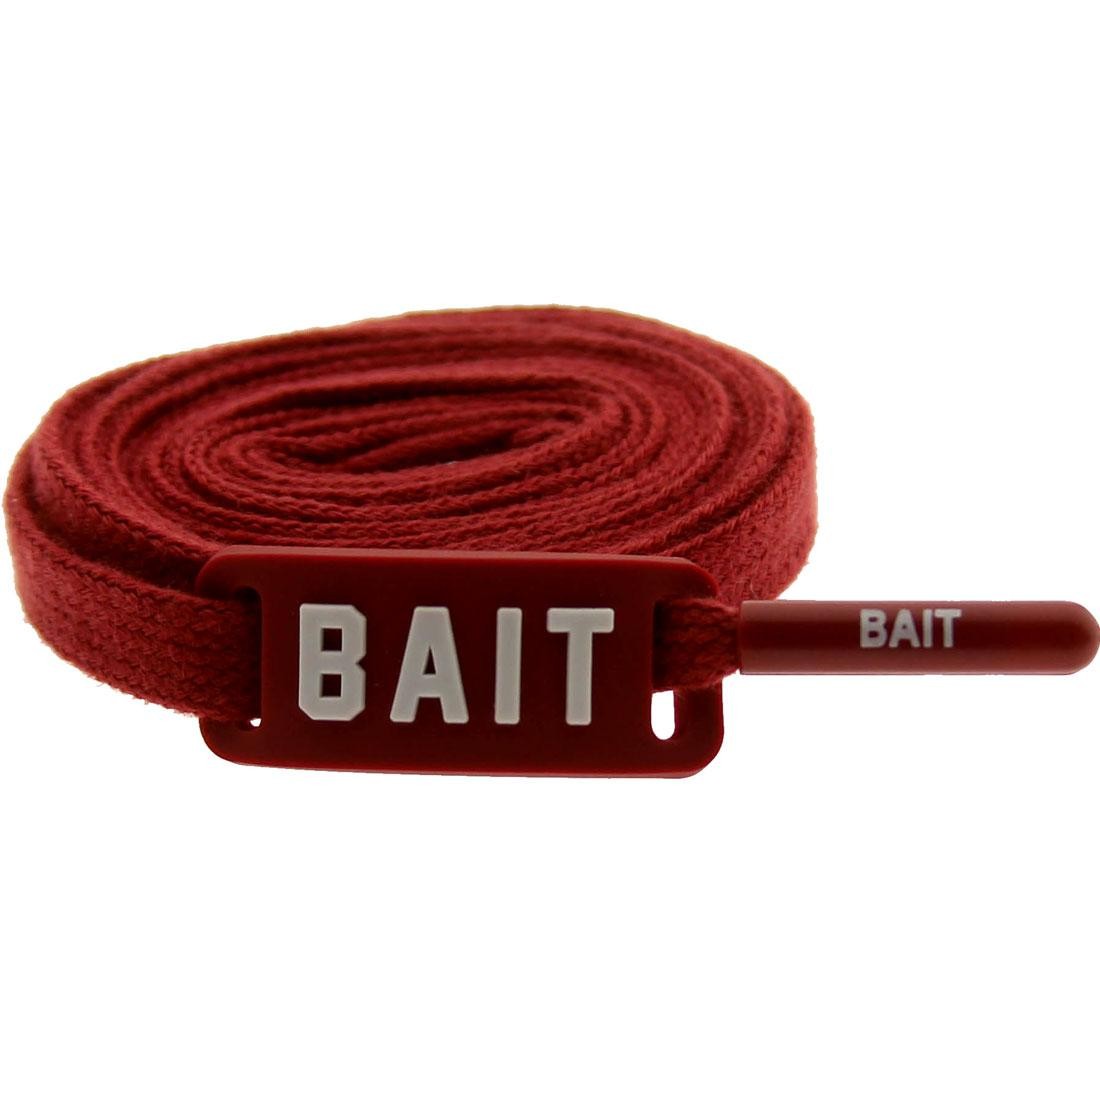 red flat shoelaces